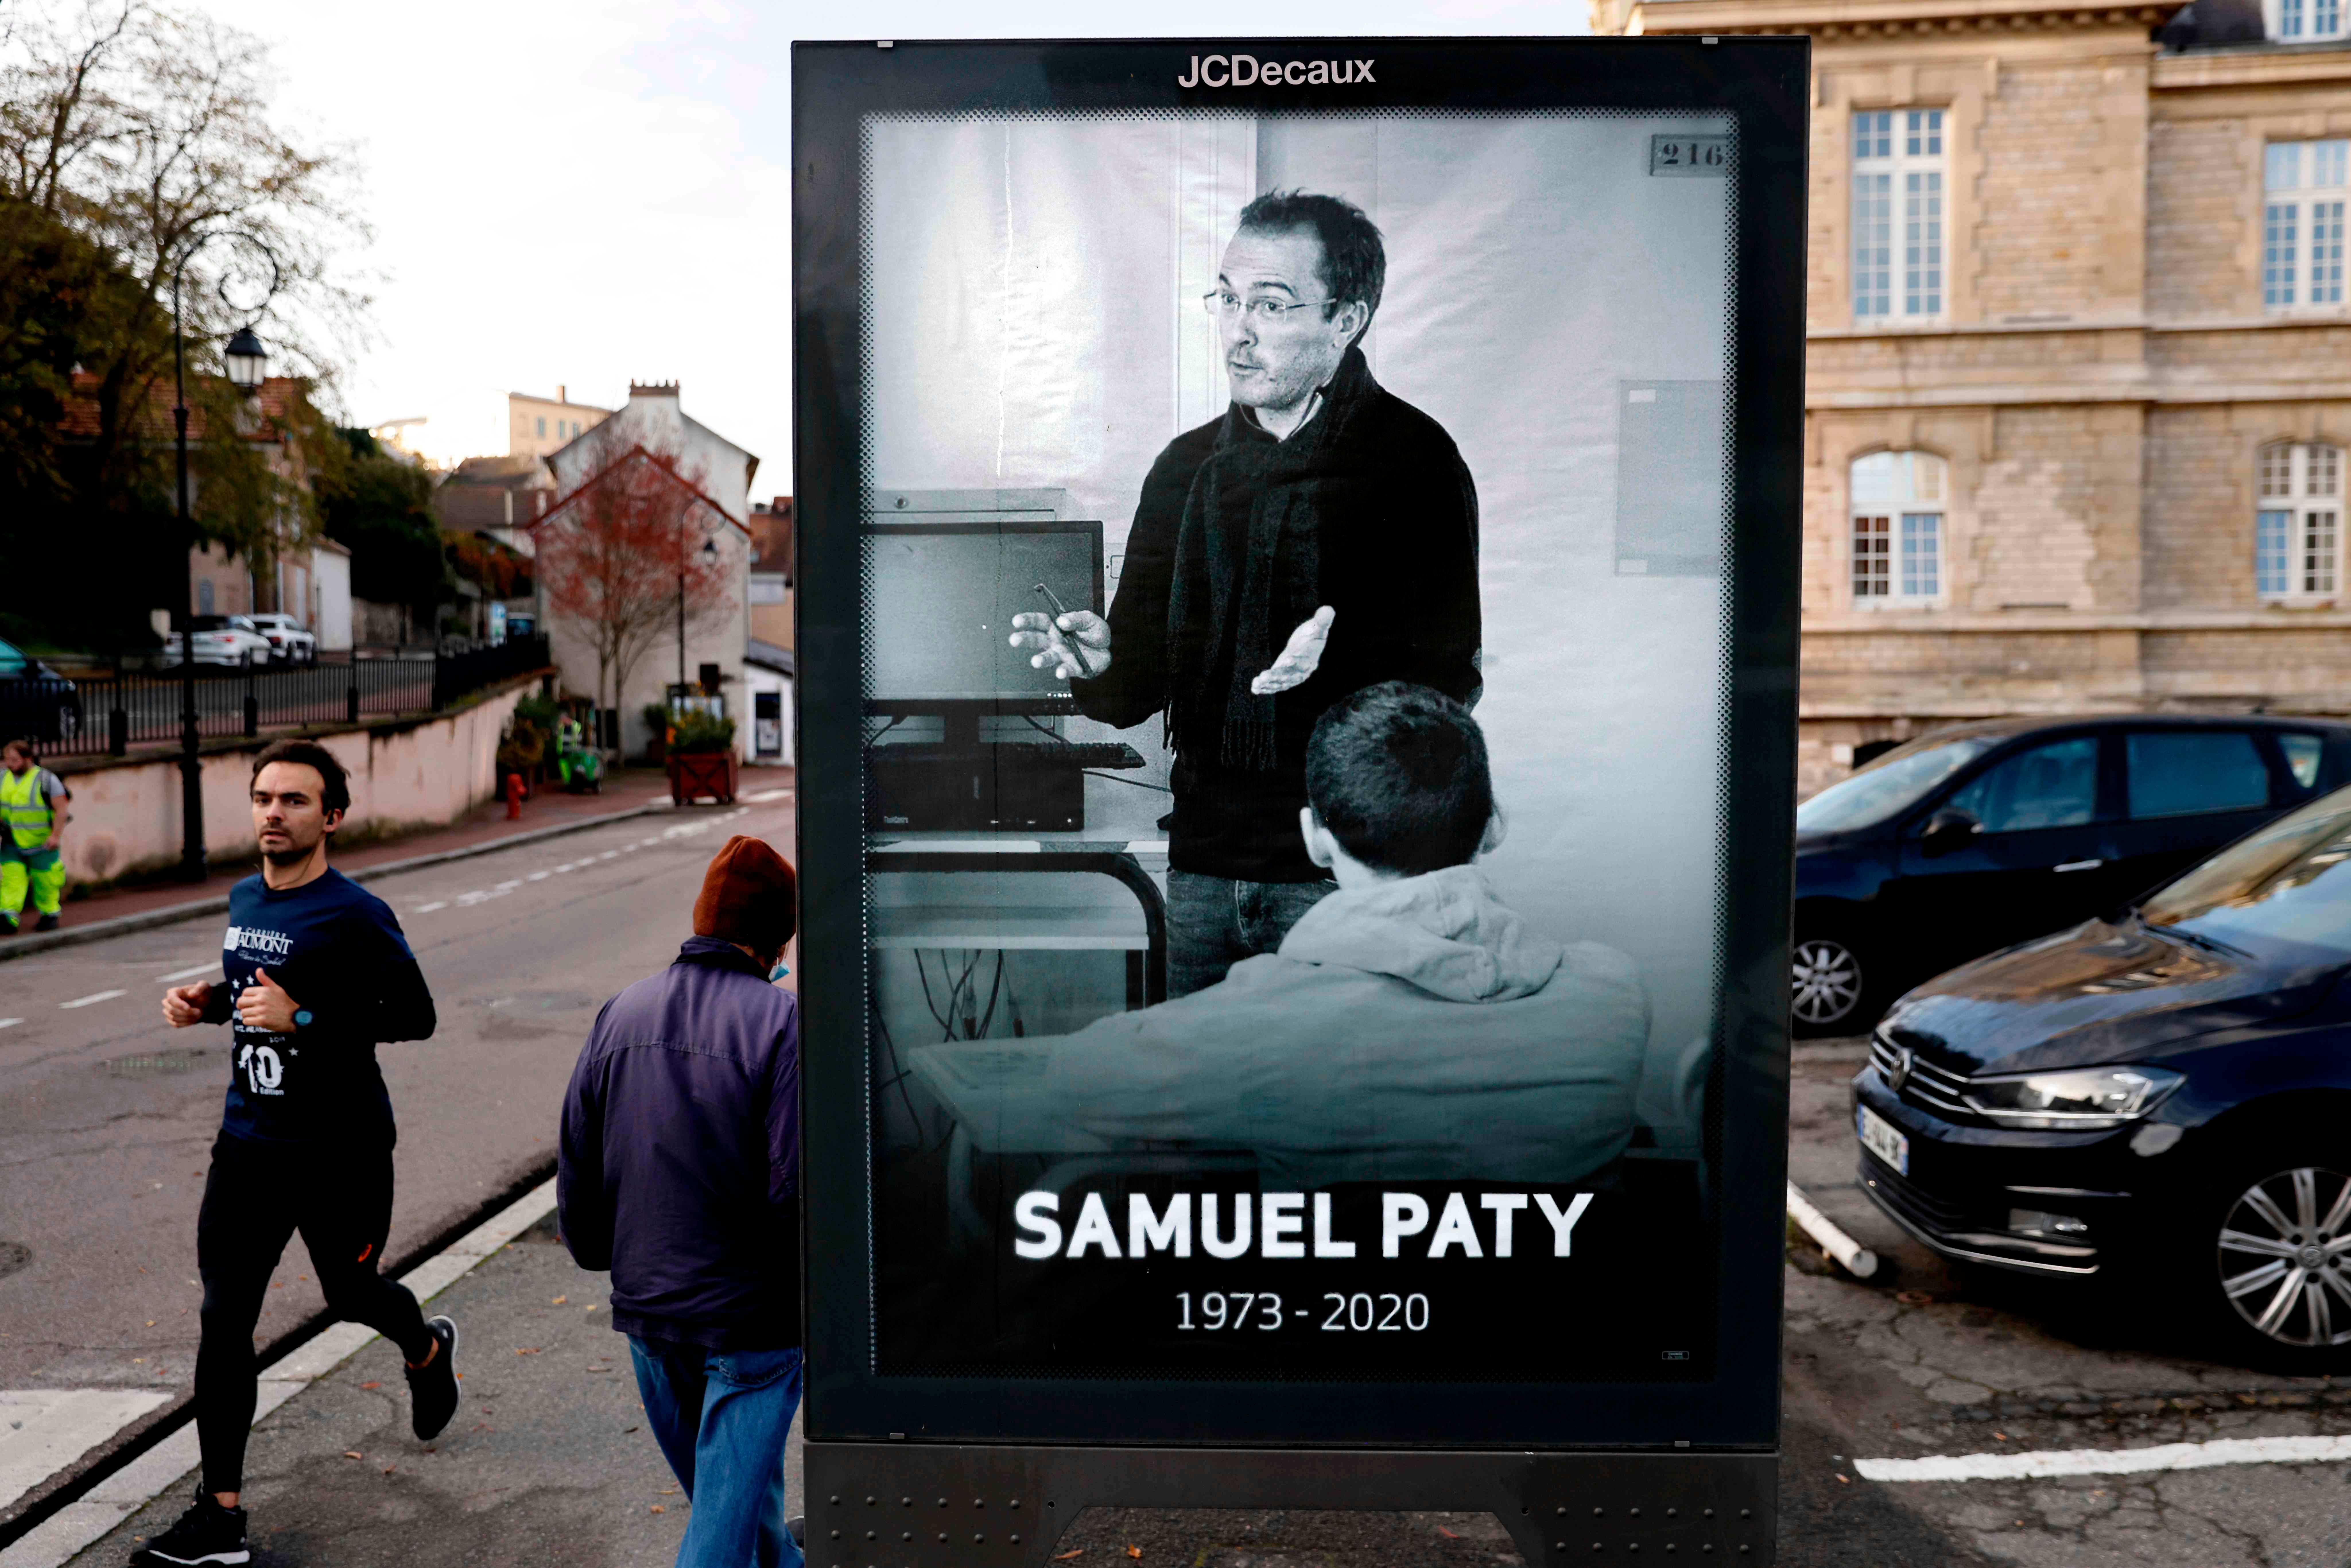 History and geography teacher Mr Paty was killed in a northwest Paris suburb in October 2020